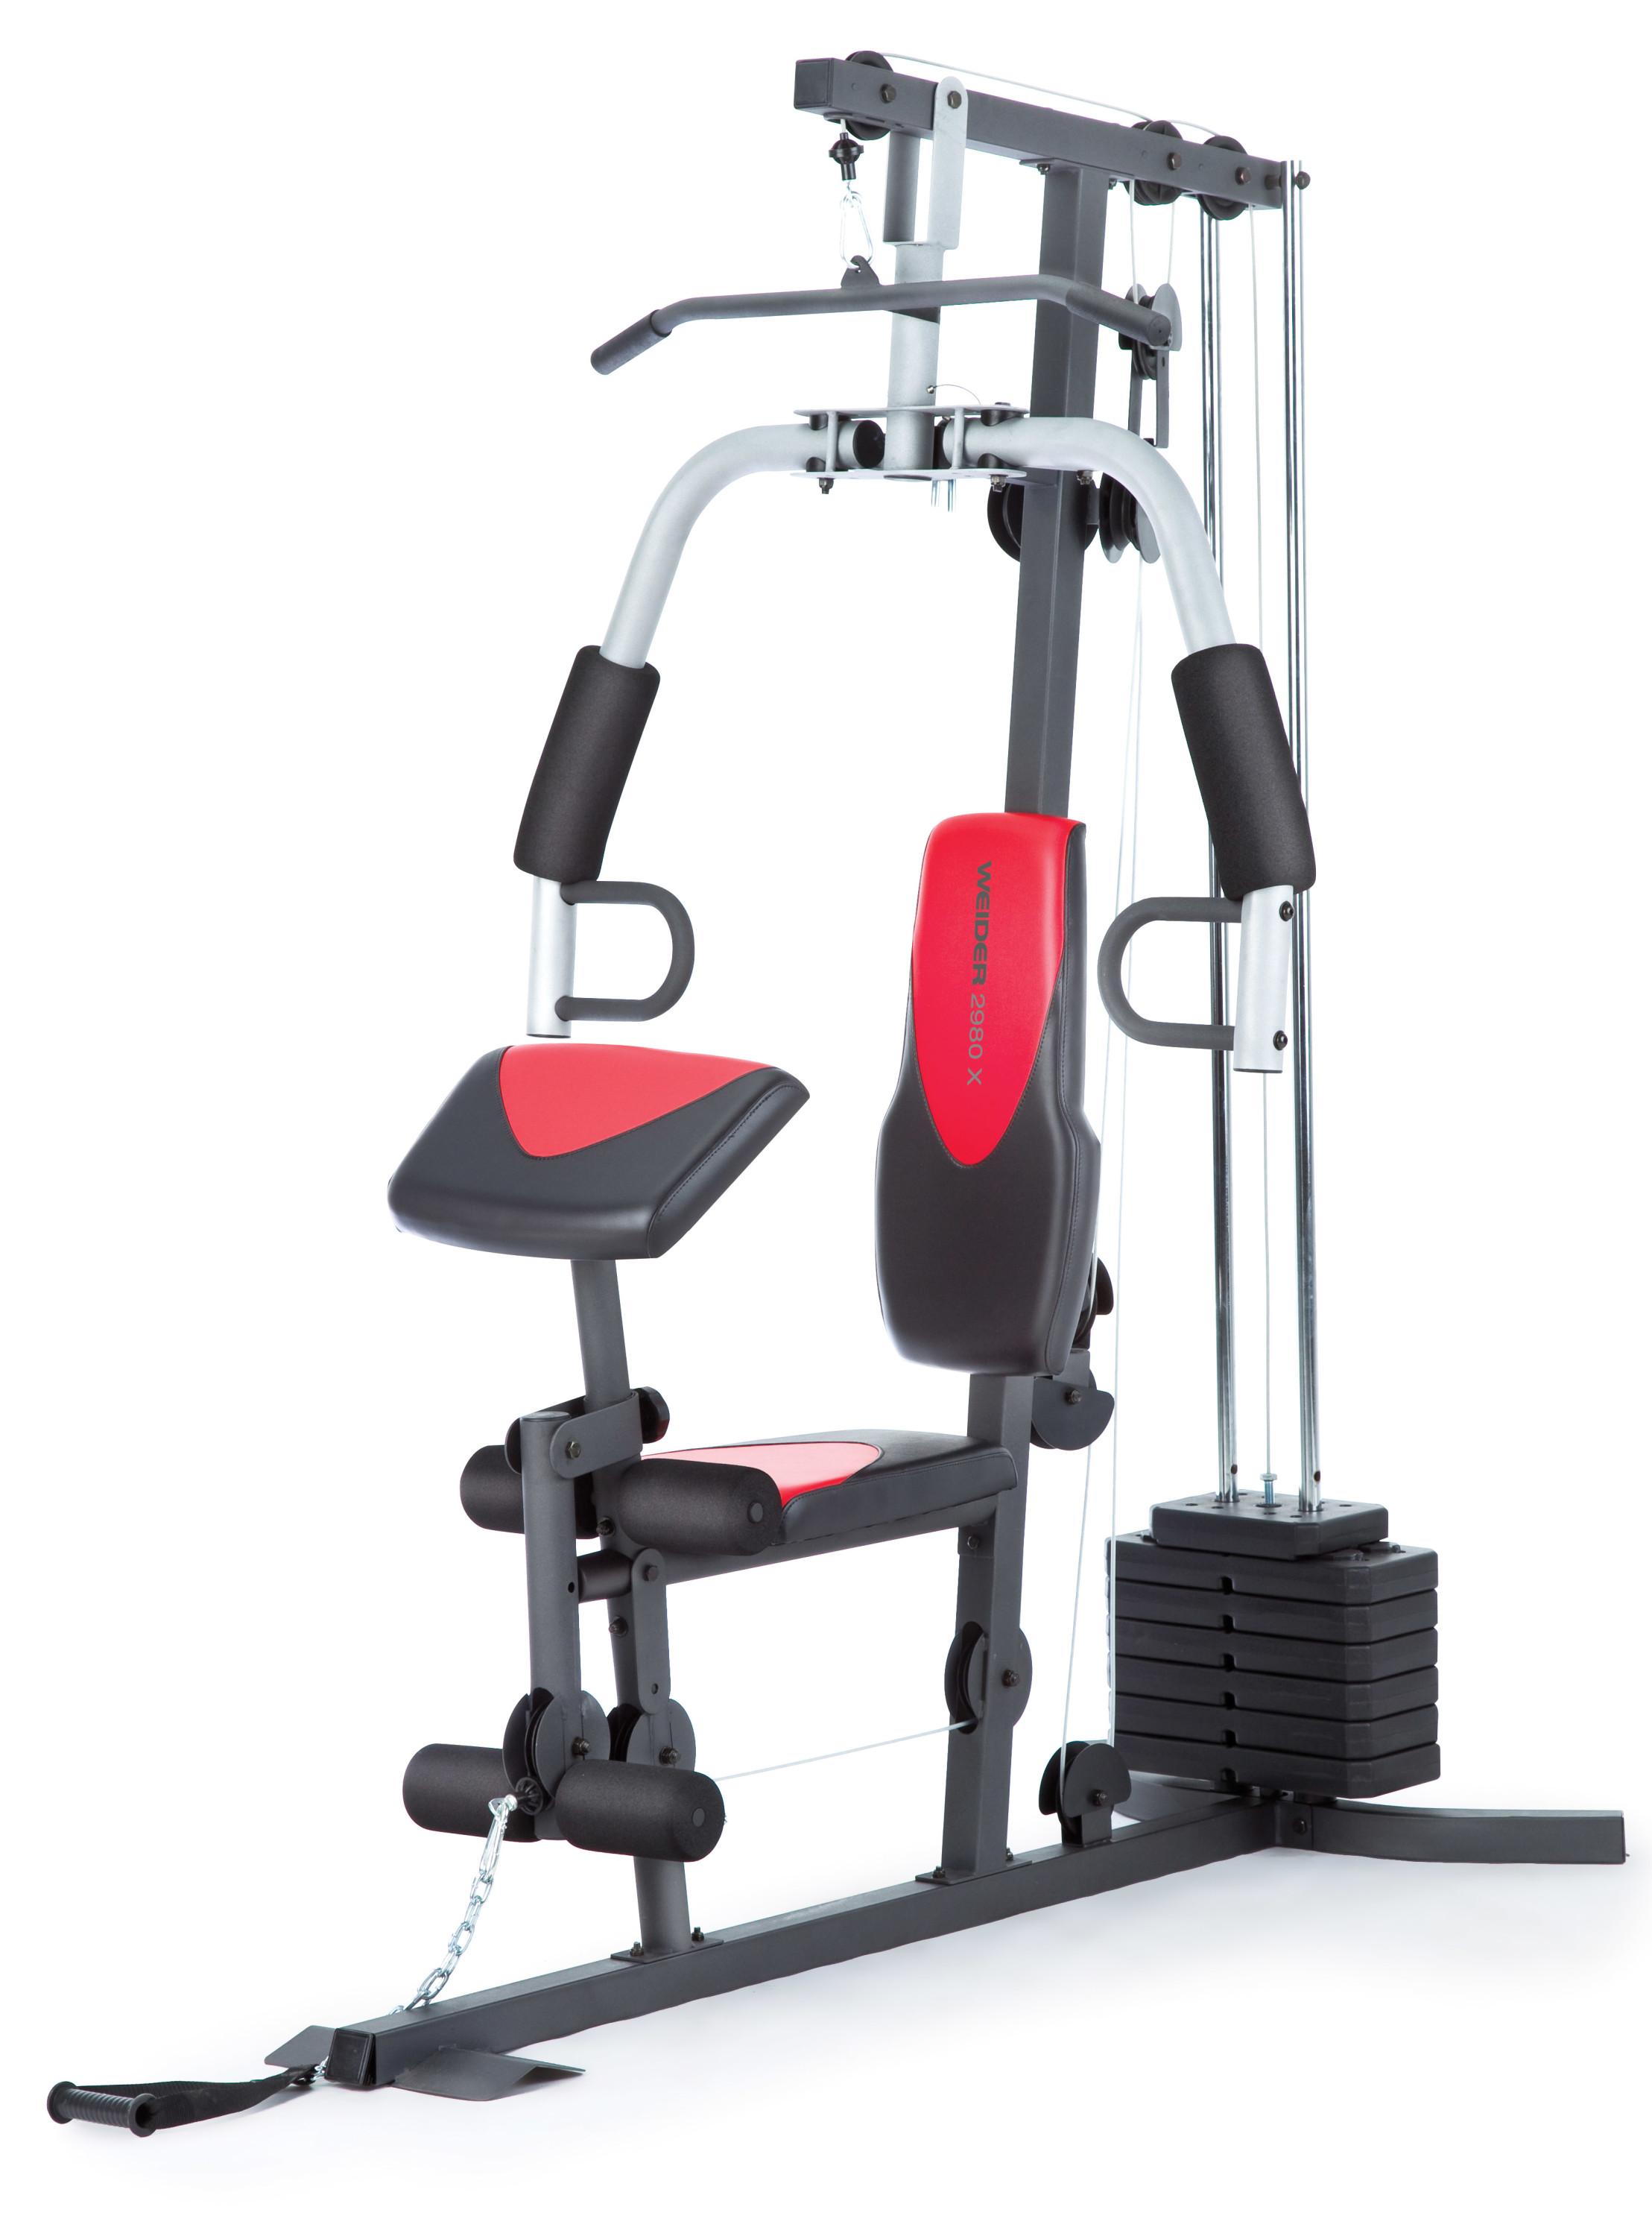 Weider 2980 X Home Gym with 80lb Vinyl Weight Stack - image 1 of 17